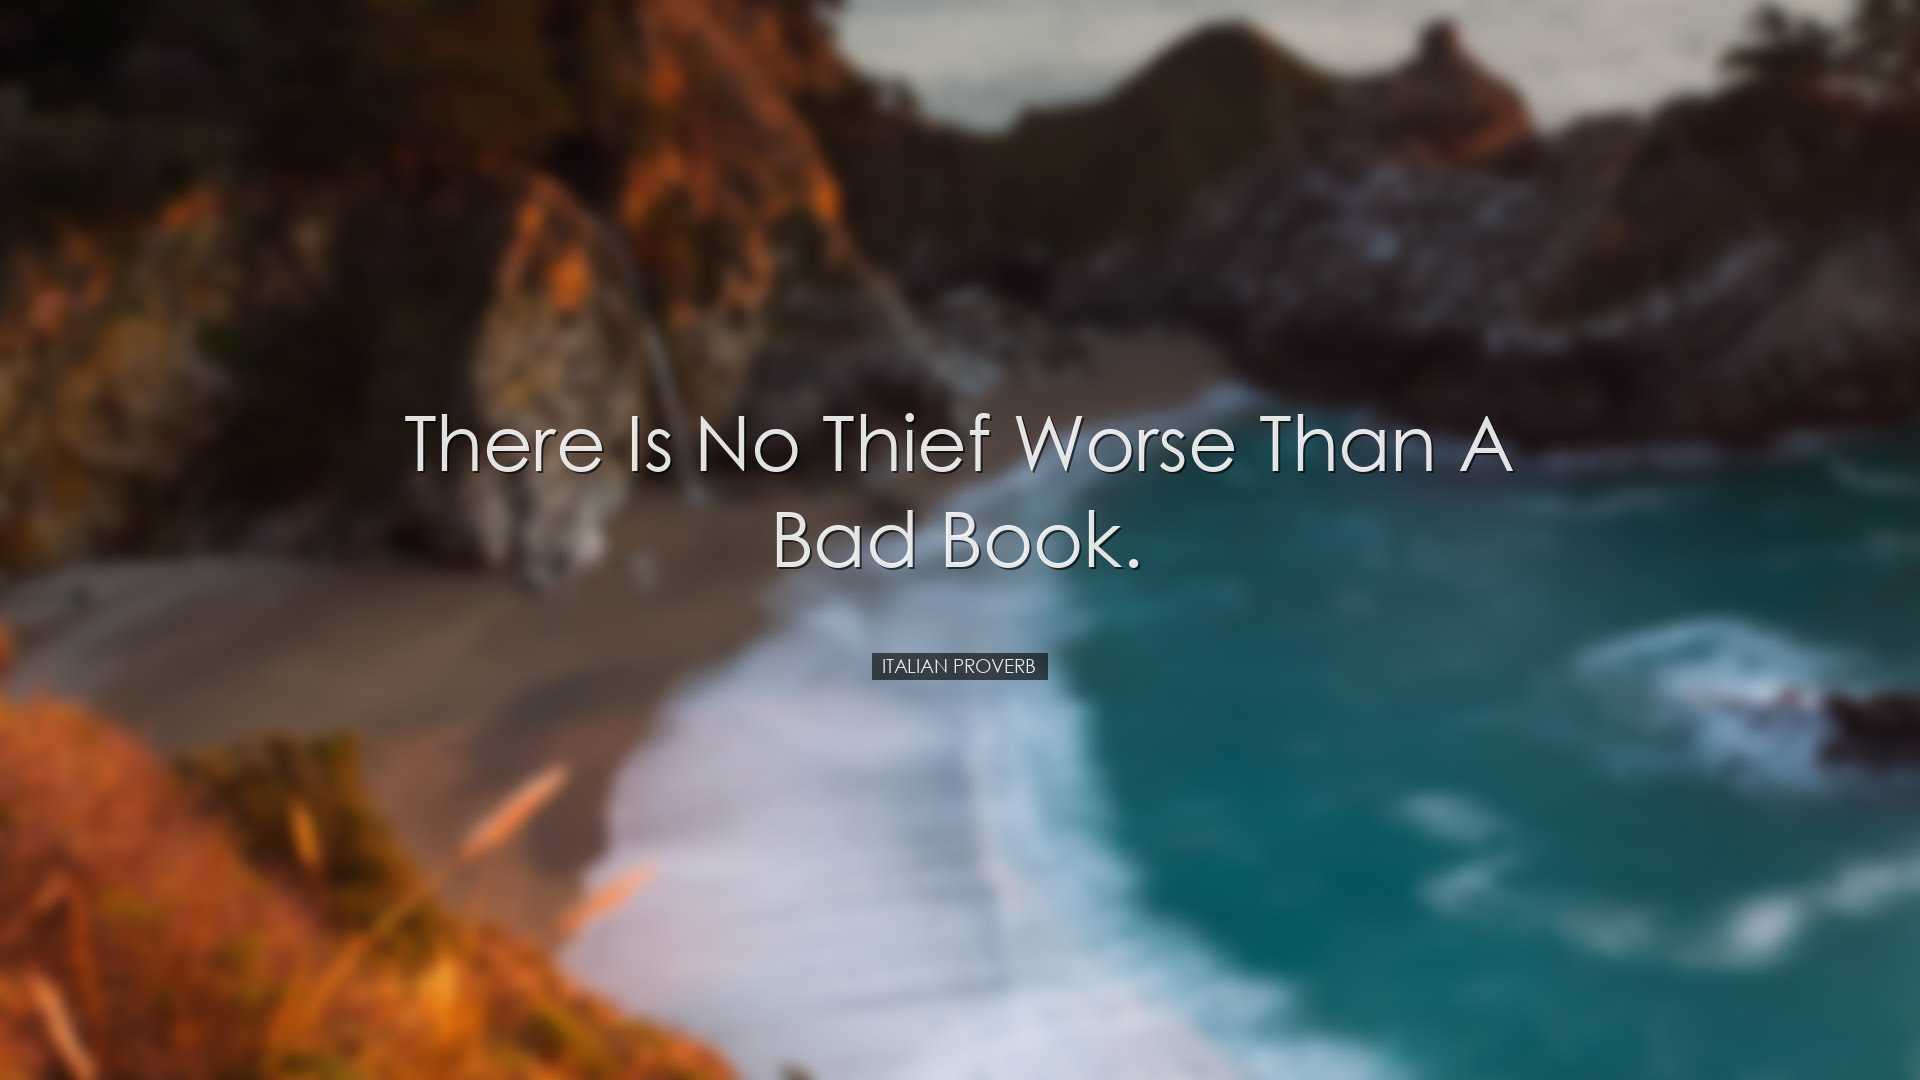 There is no thief worse than a bad book. - Italian Proverb